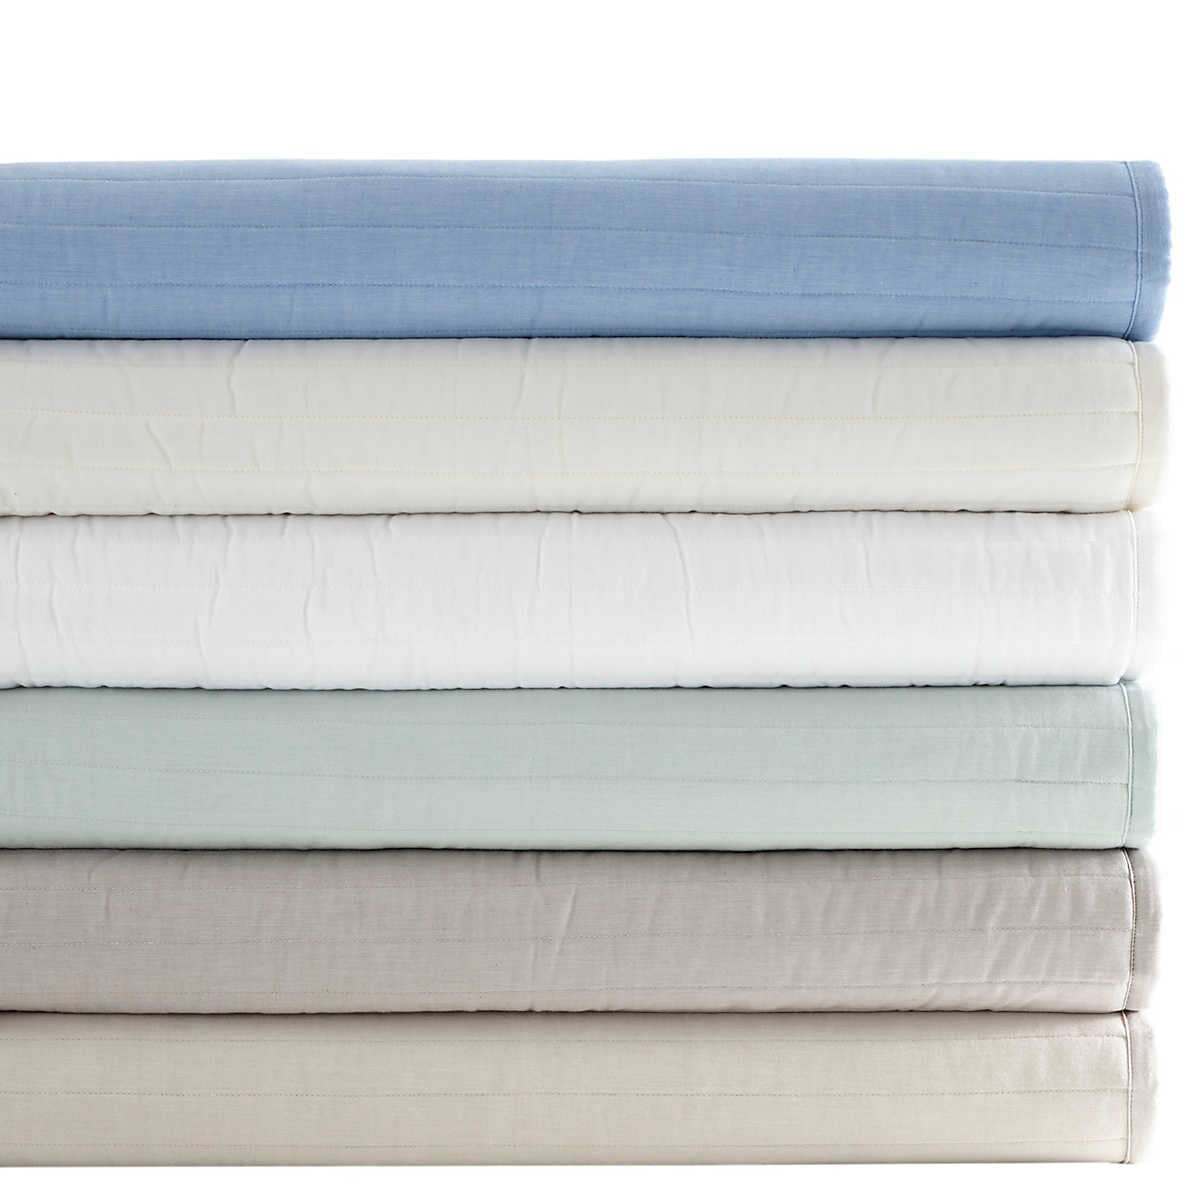 Cozy Cotton French Blue Quilt Comforters, Quilts & Coverlets 